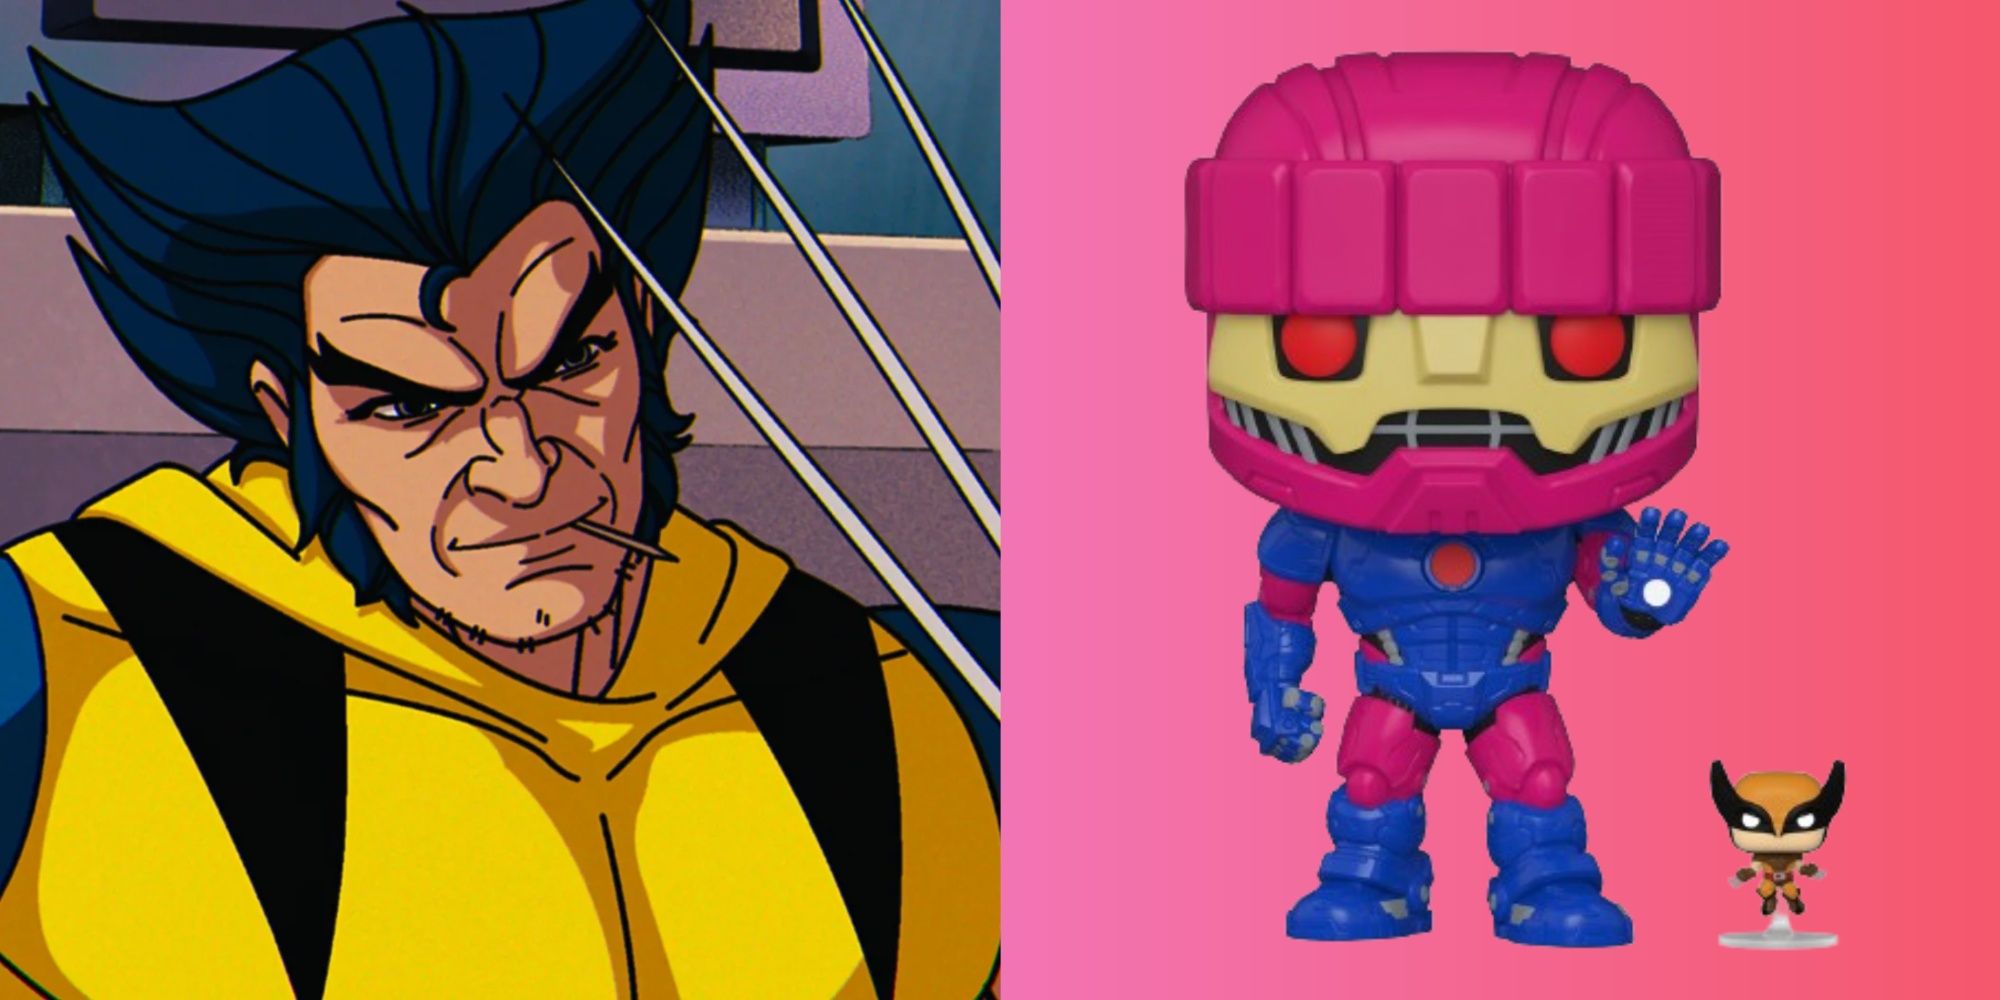 wolverine in x-men 97, and a jumbo sentinel funko pop with mini wolverine figure